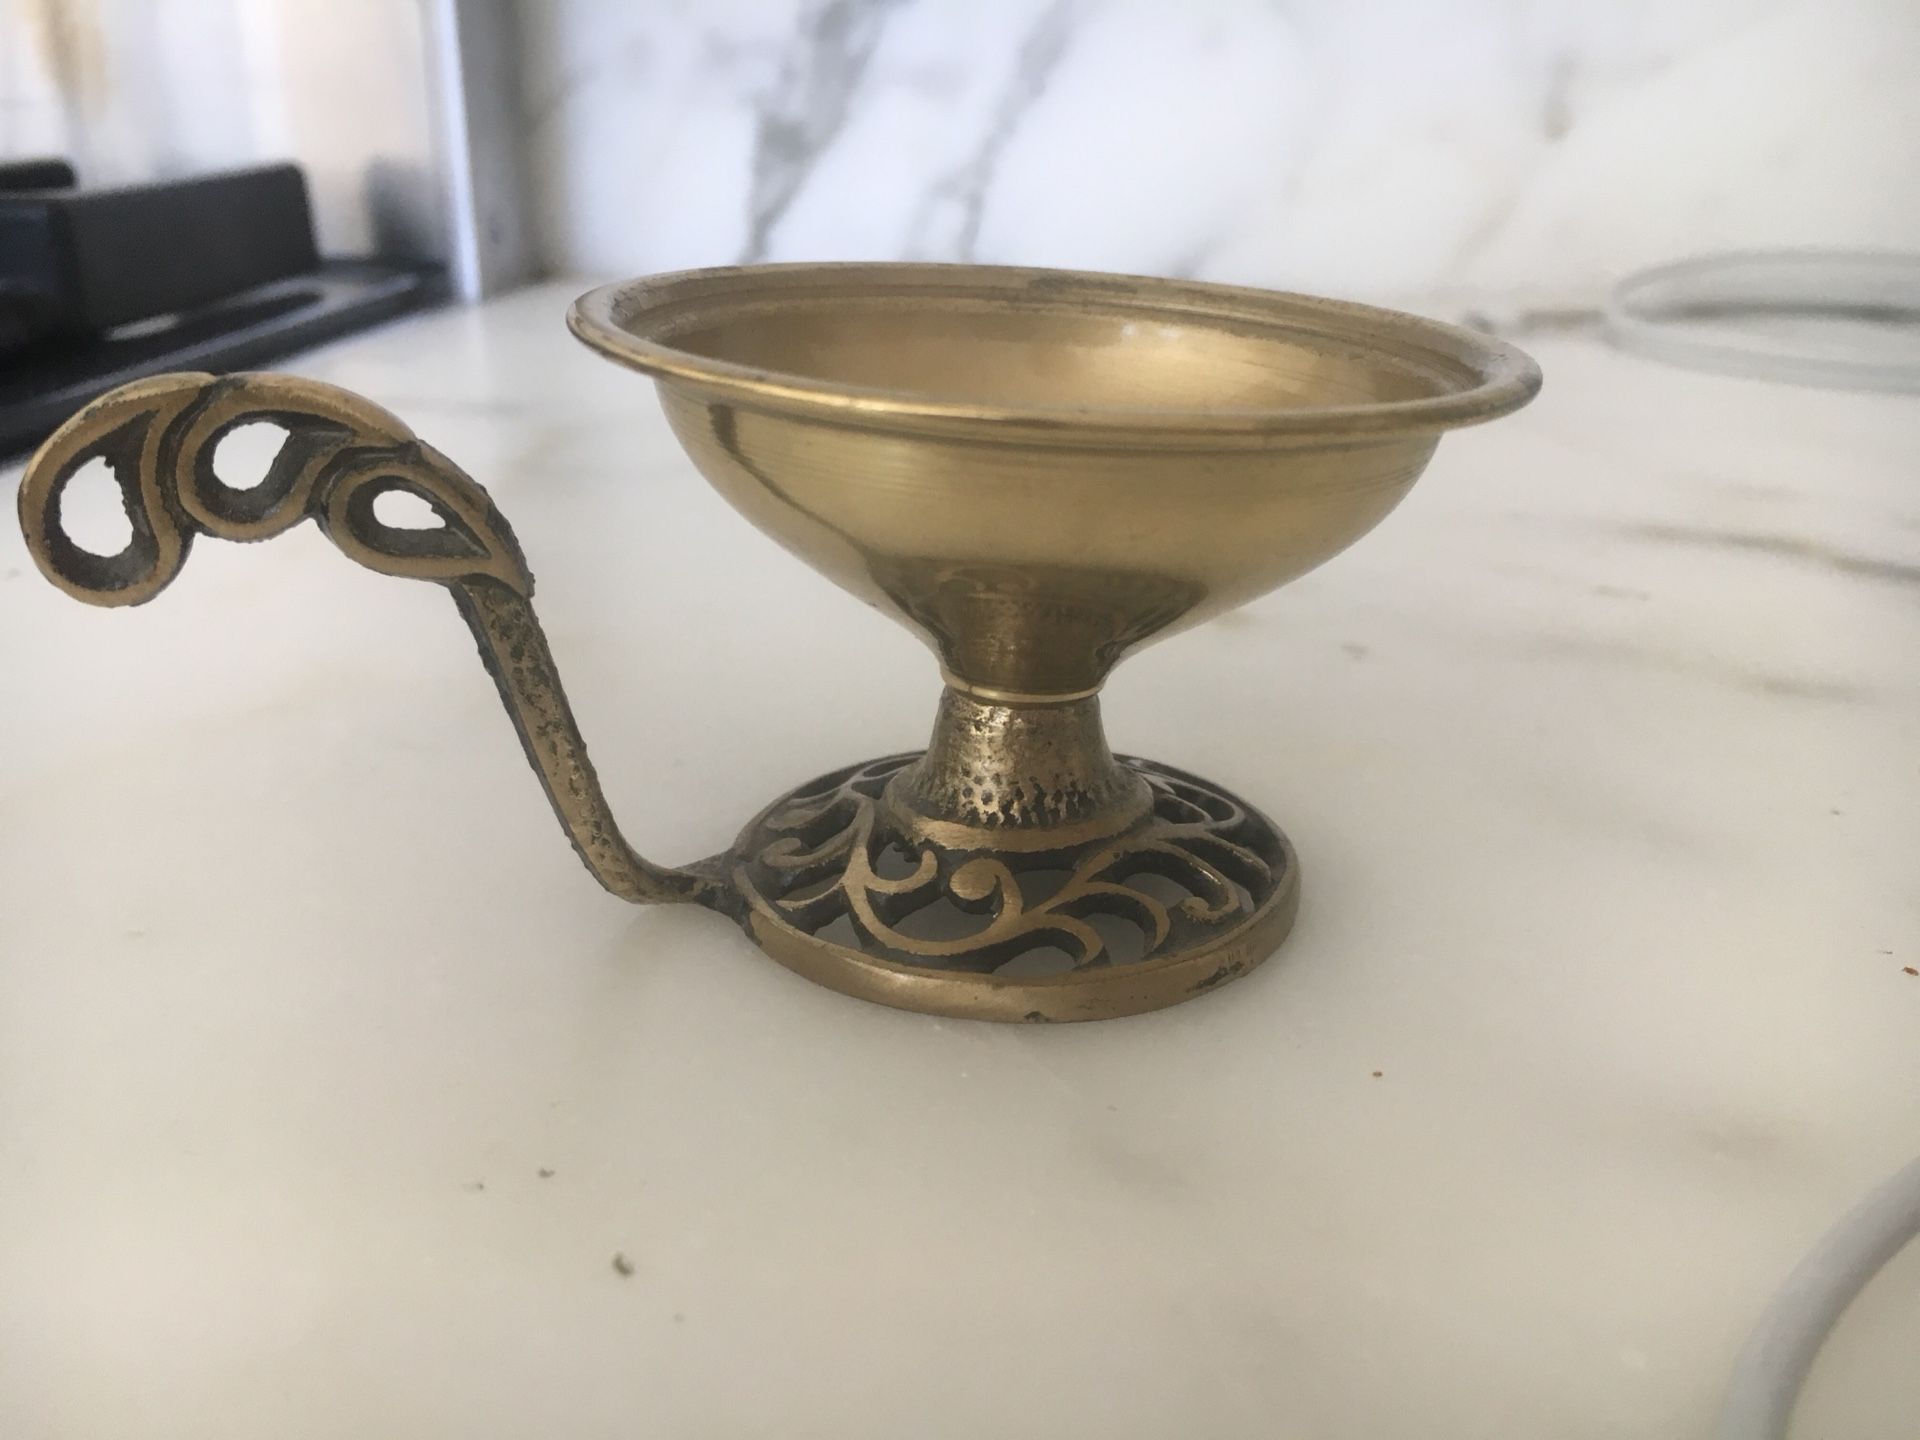 Vintage brass candlestick from Israel